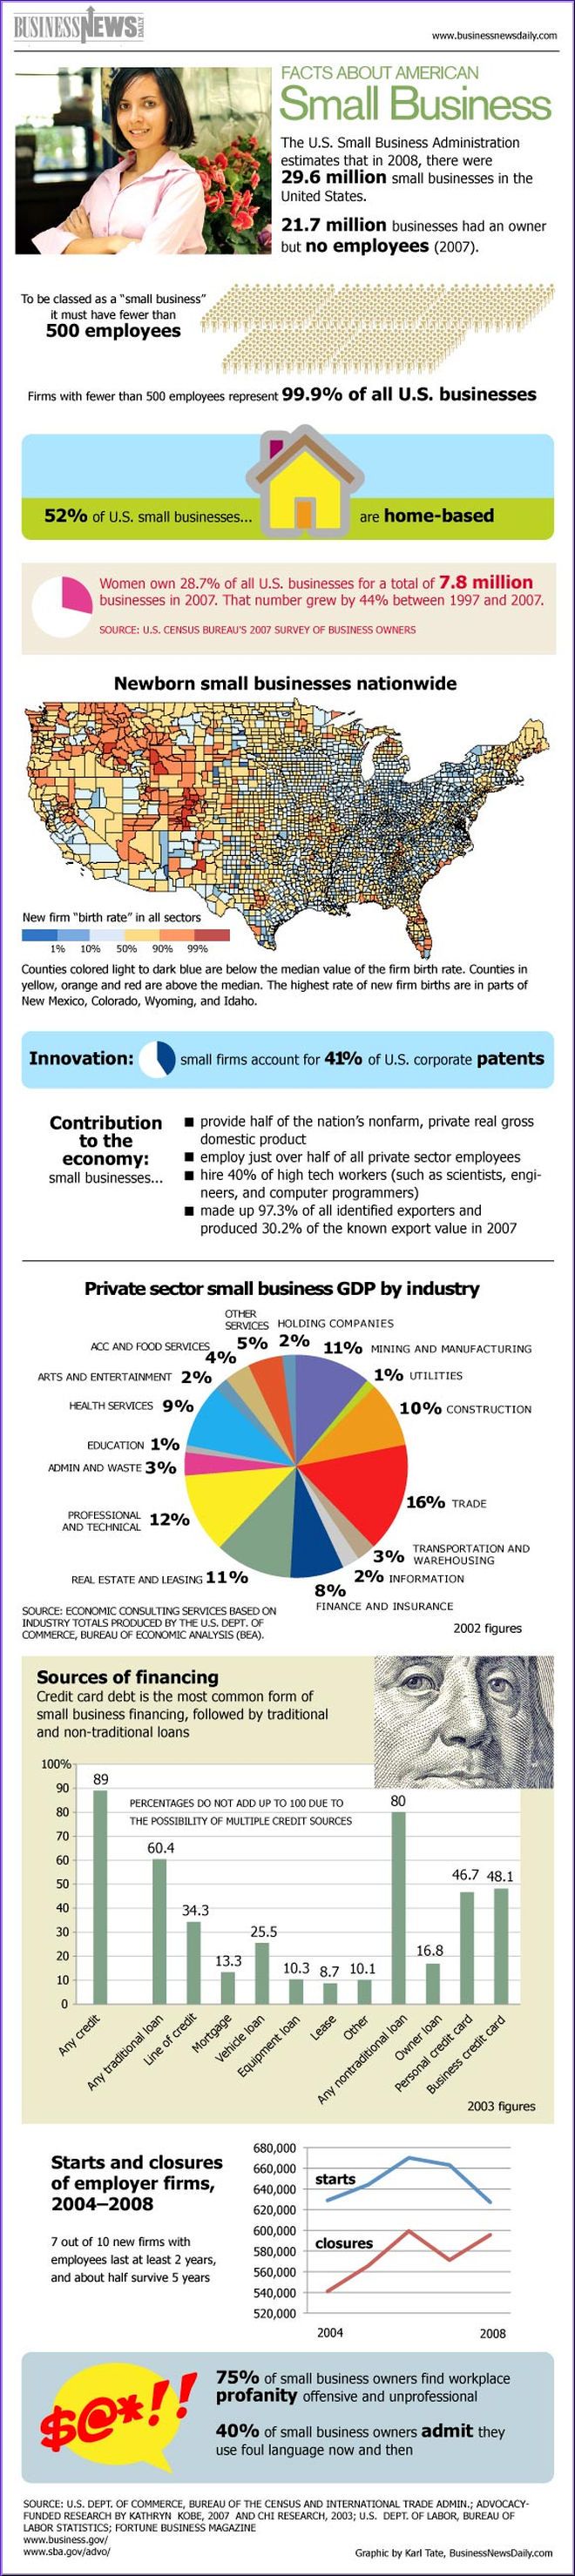 Infographic: U.S. Small Business Facts